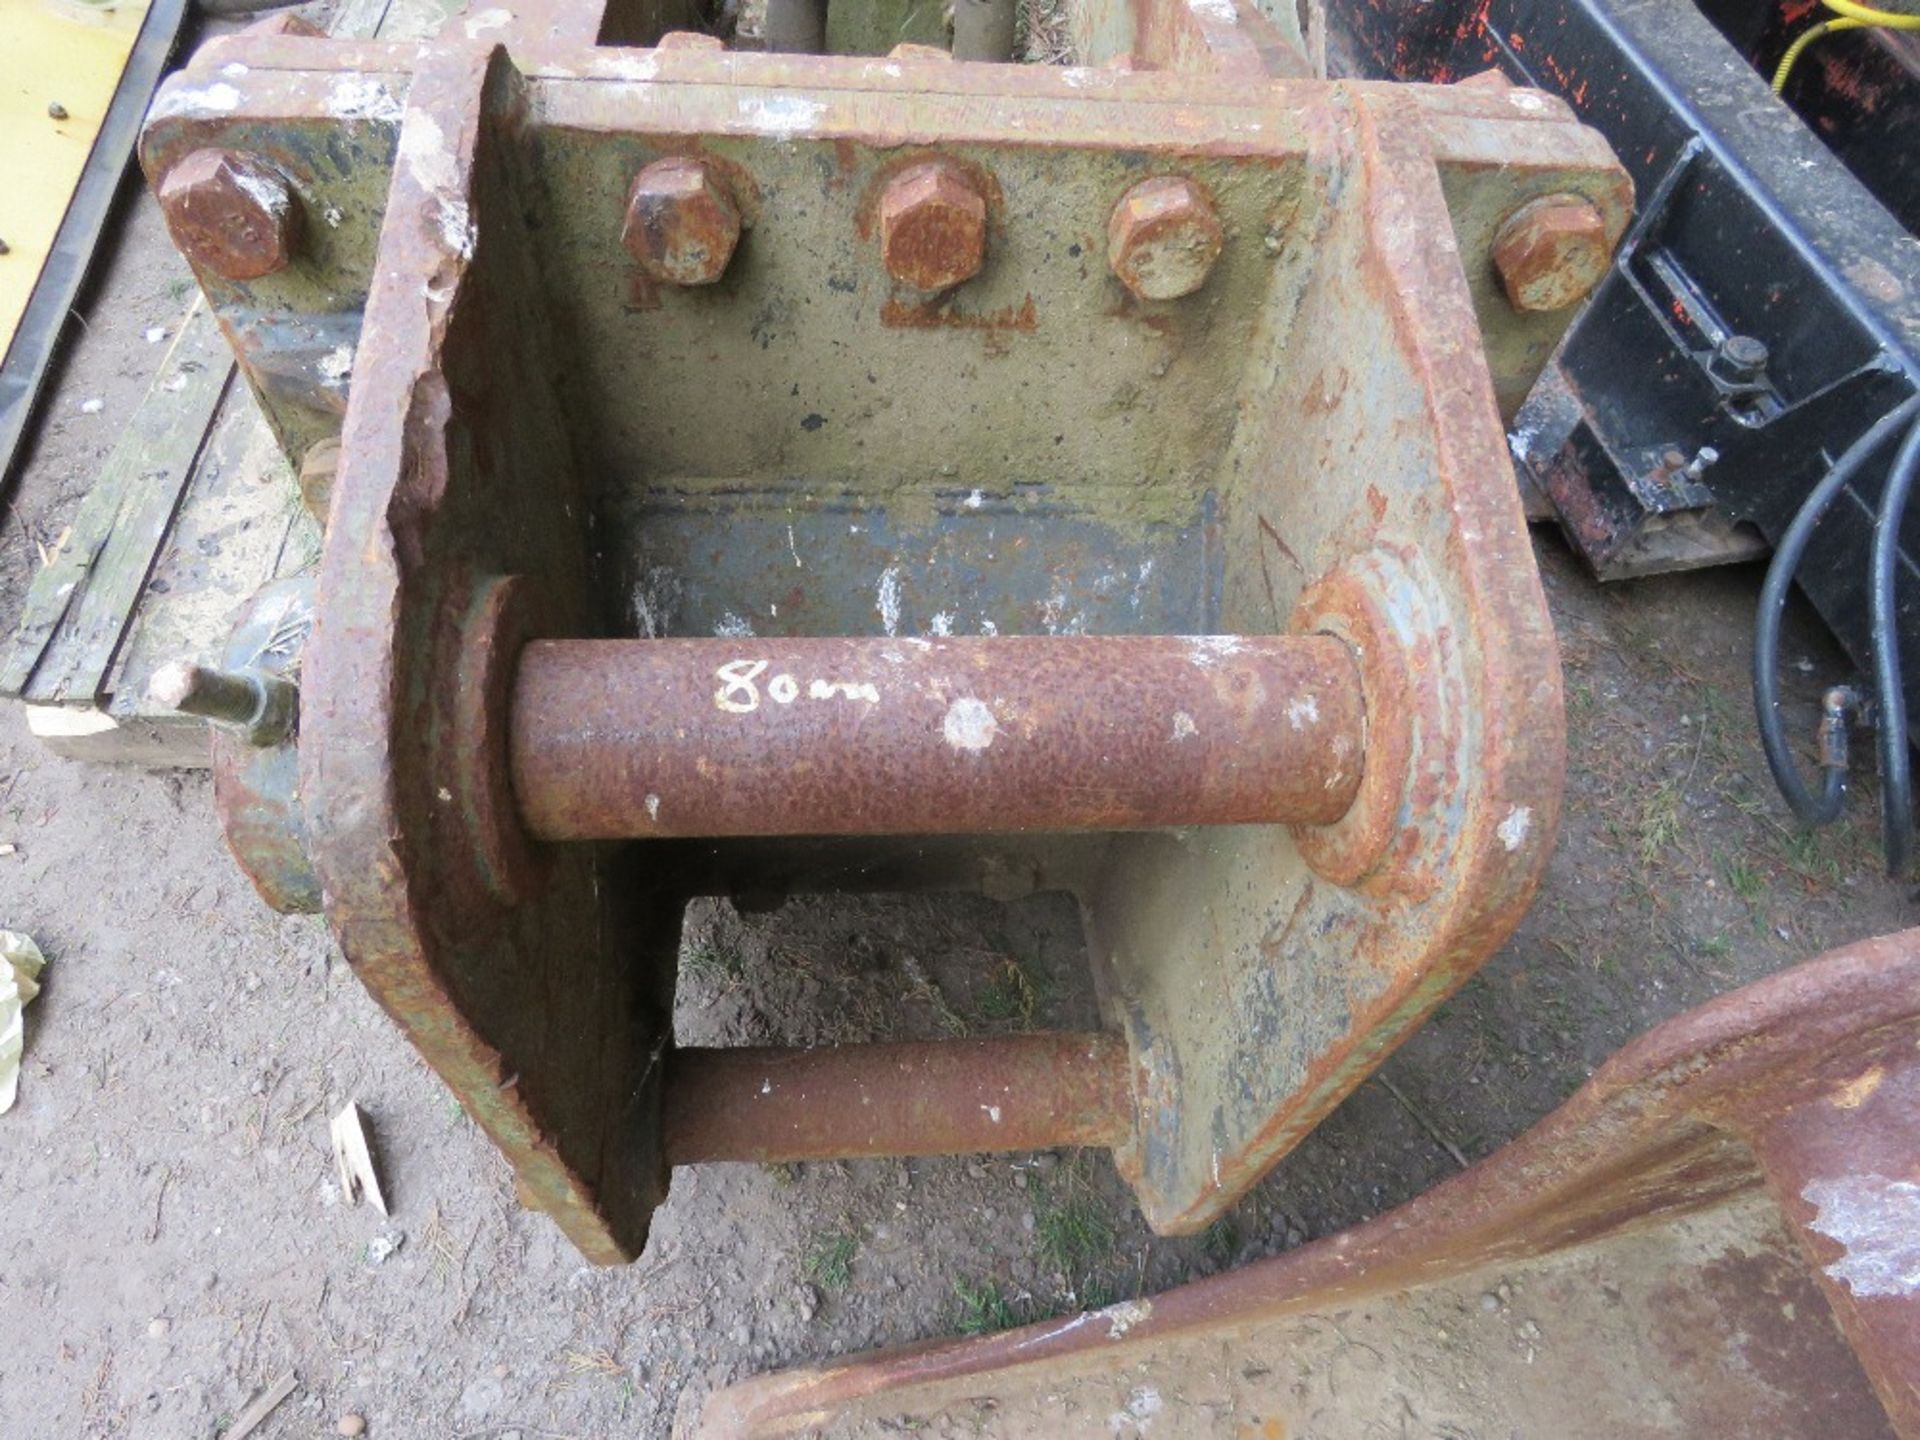 TAESHIN TB350G EXCAVATOR BREAKER ON 80MM PINS. 2220KG OPERATING WEIGHT. SN:671. THIS LOT IS SOLD UND - Image 4 of 4